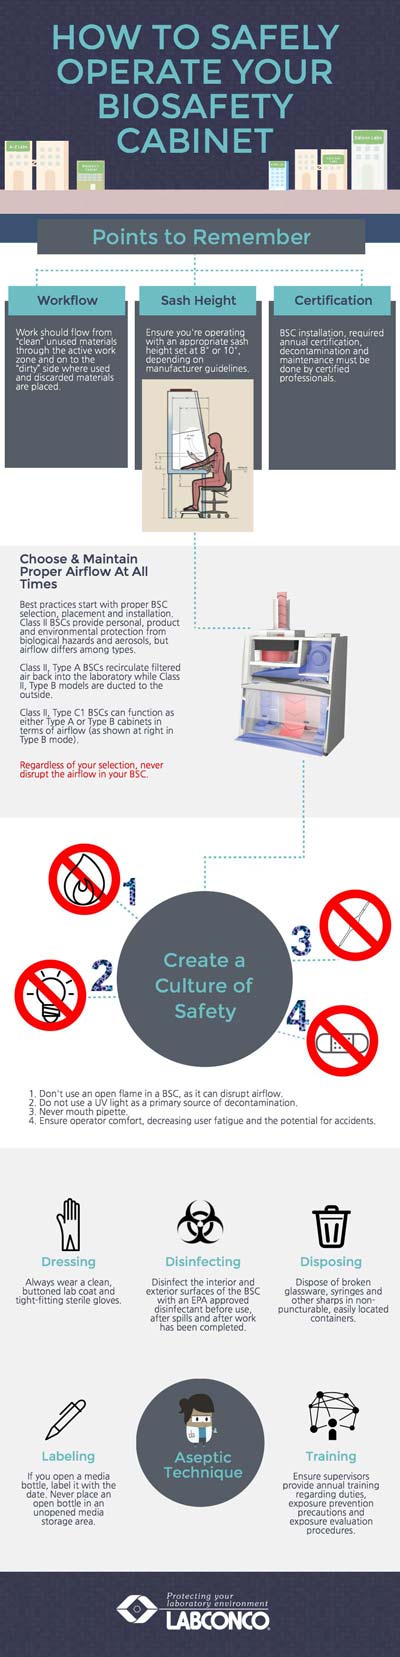 How to Safely Operate a BSC Infographic